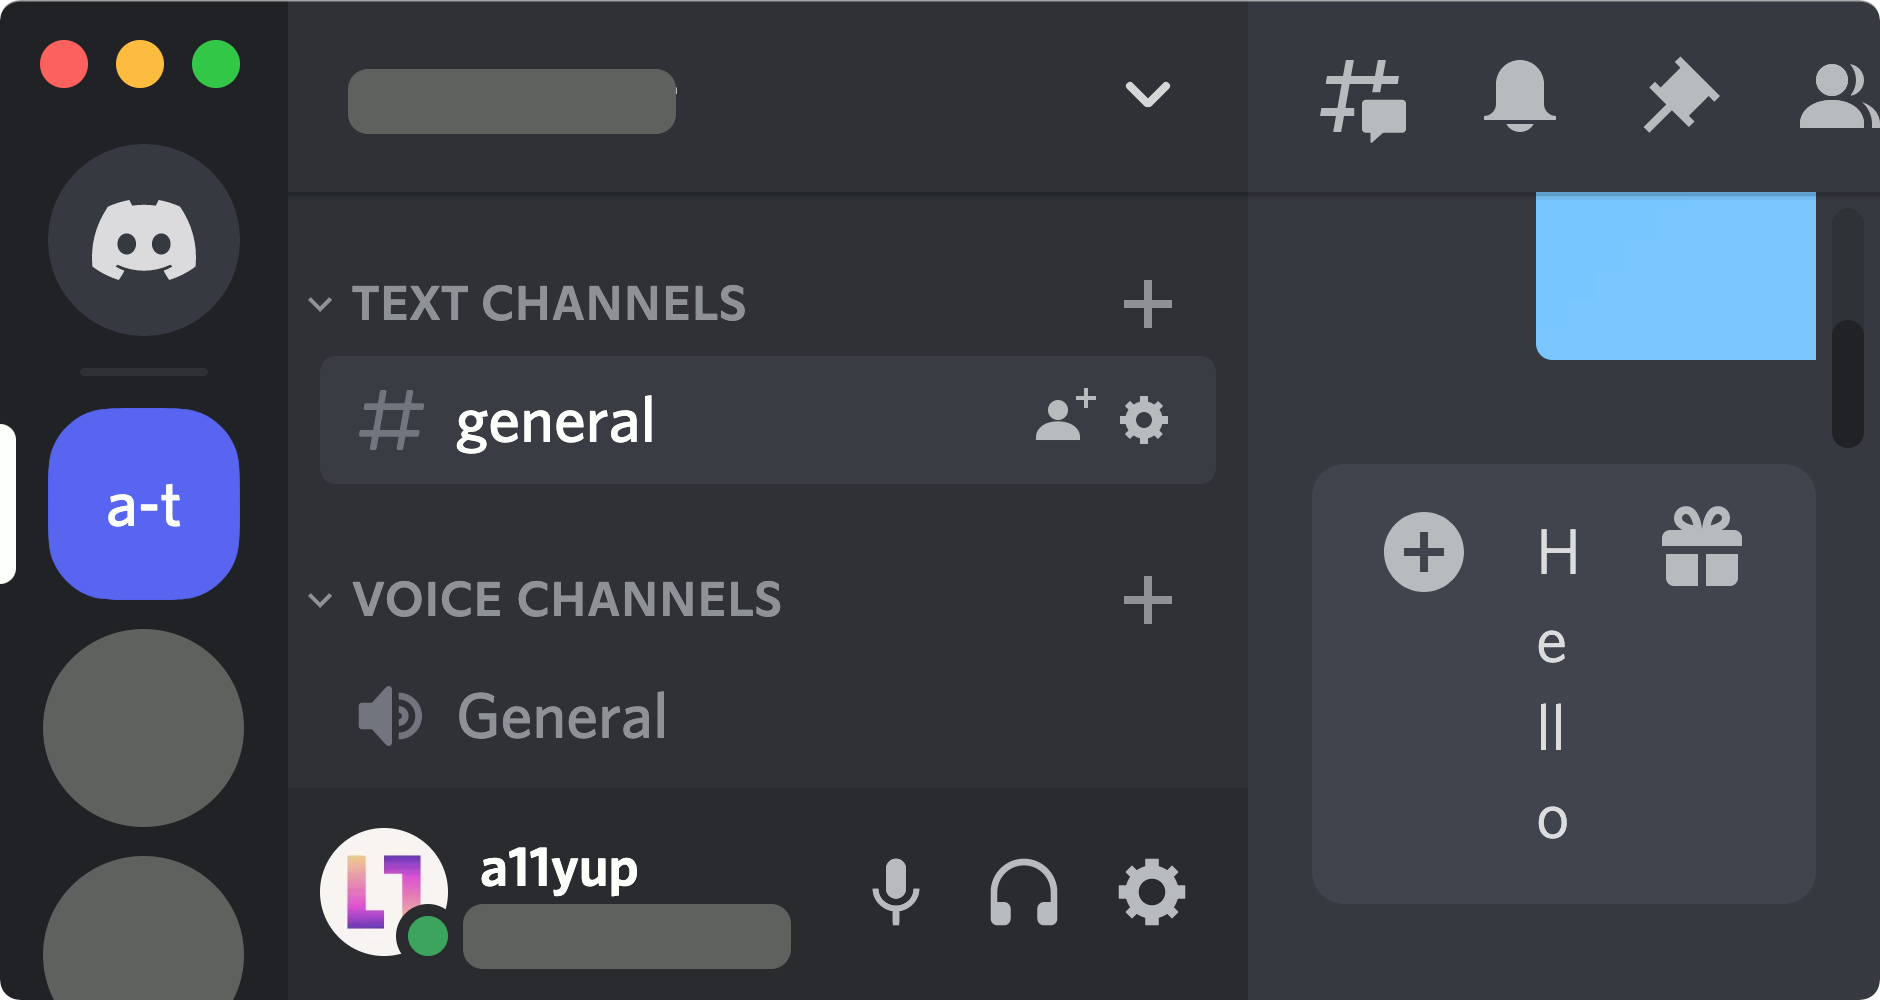 CryptoTab Discord Became Even More Accessible!